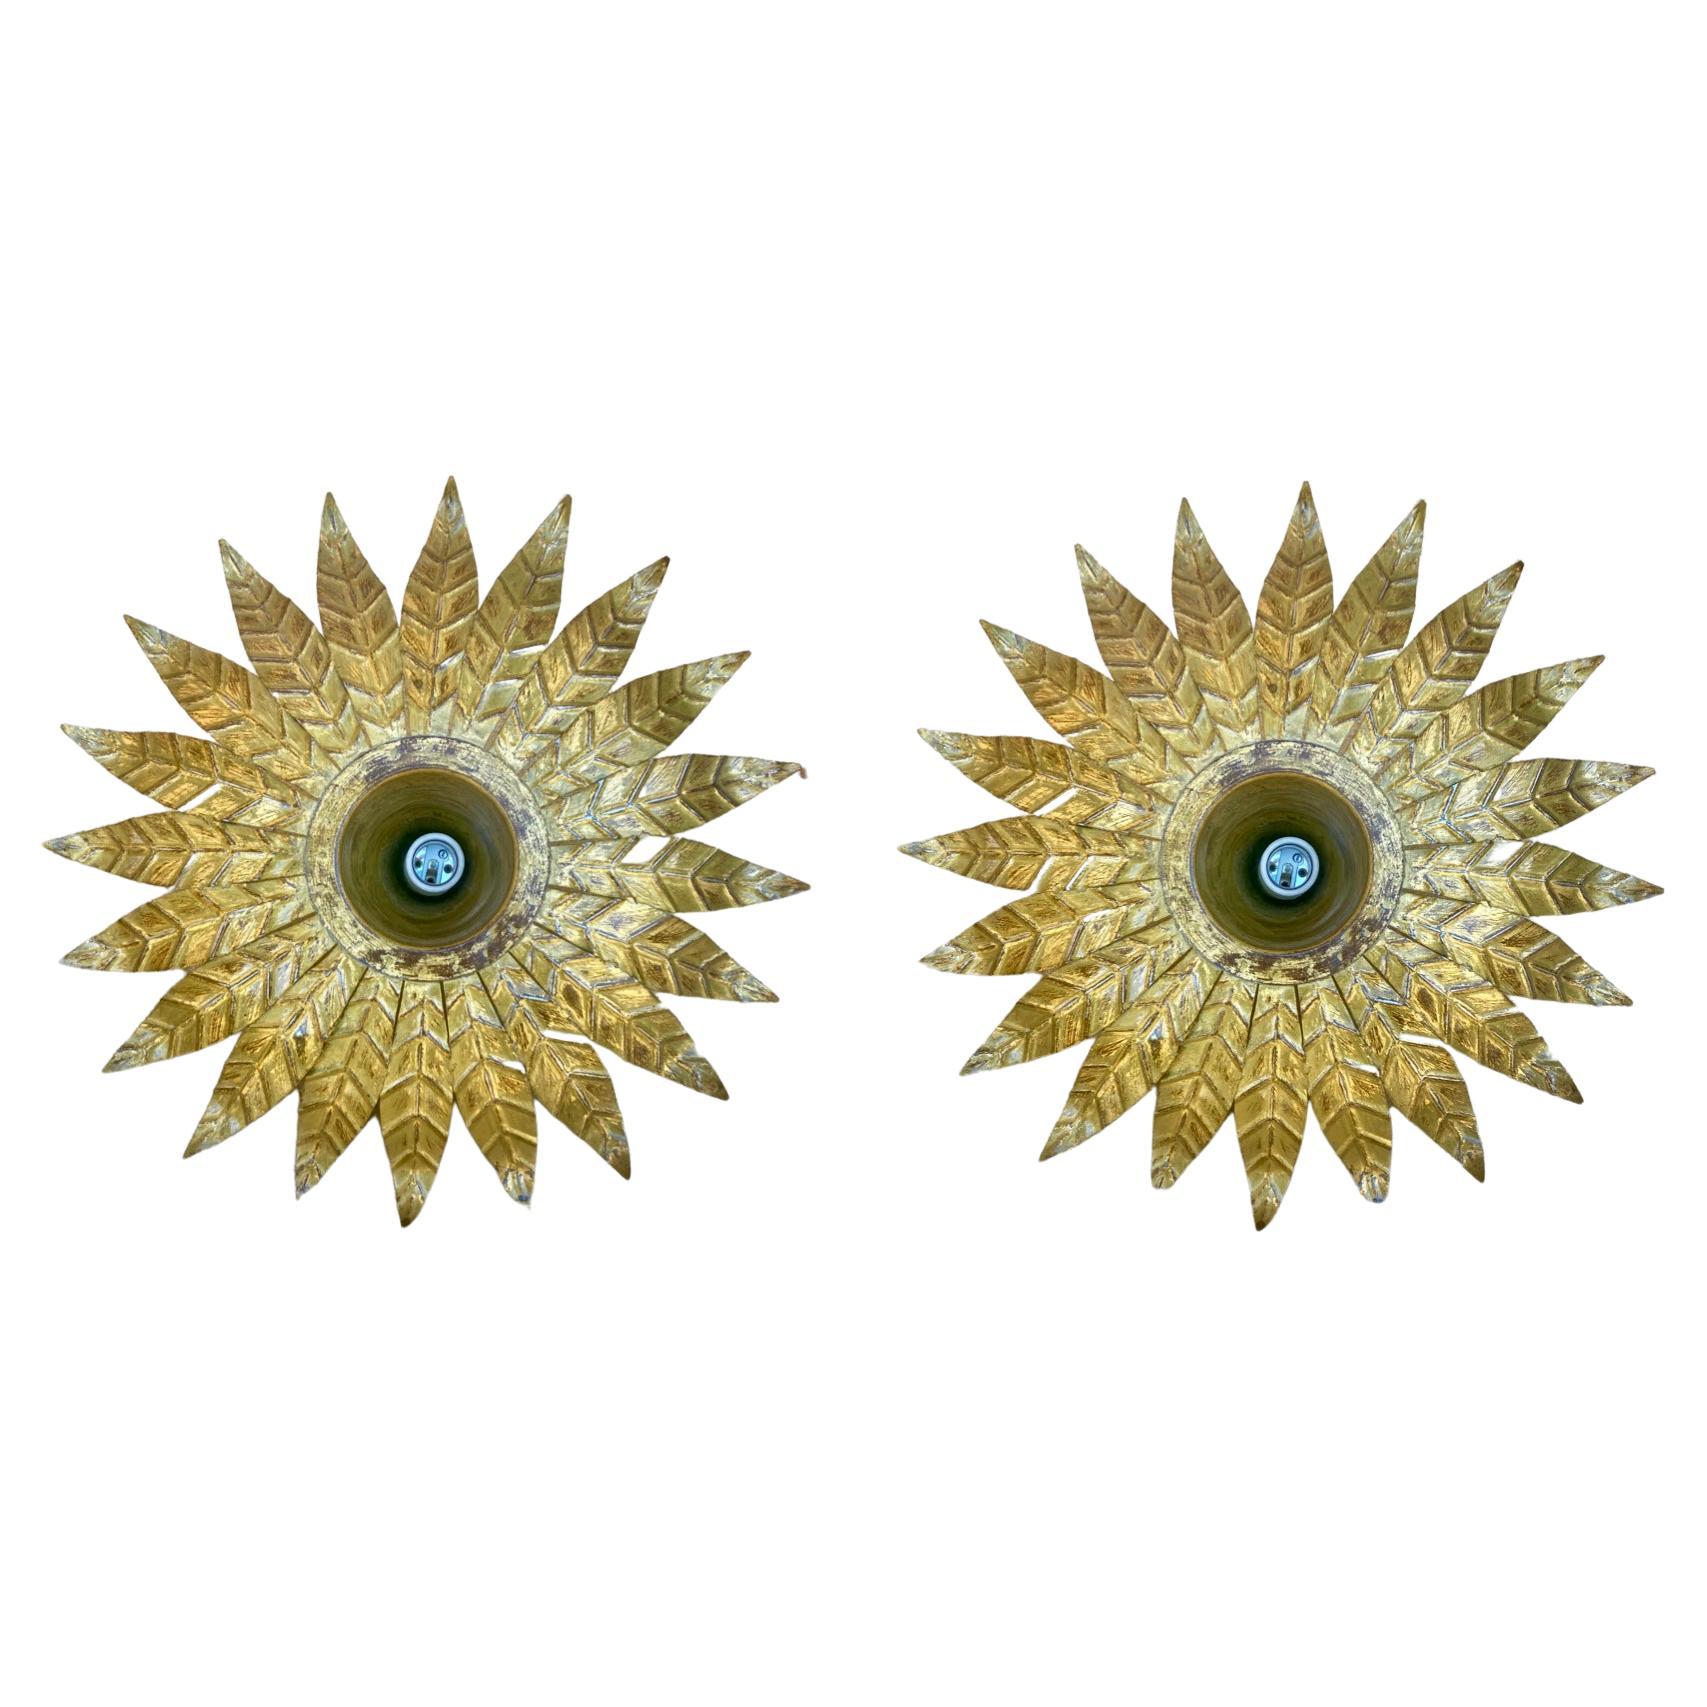 Pair of Mid-Century Spanish Sunburst Ceiling Light Fixture or Wall Sconce in Wro